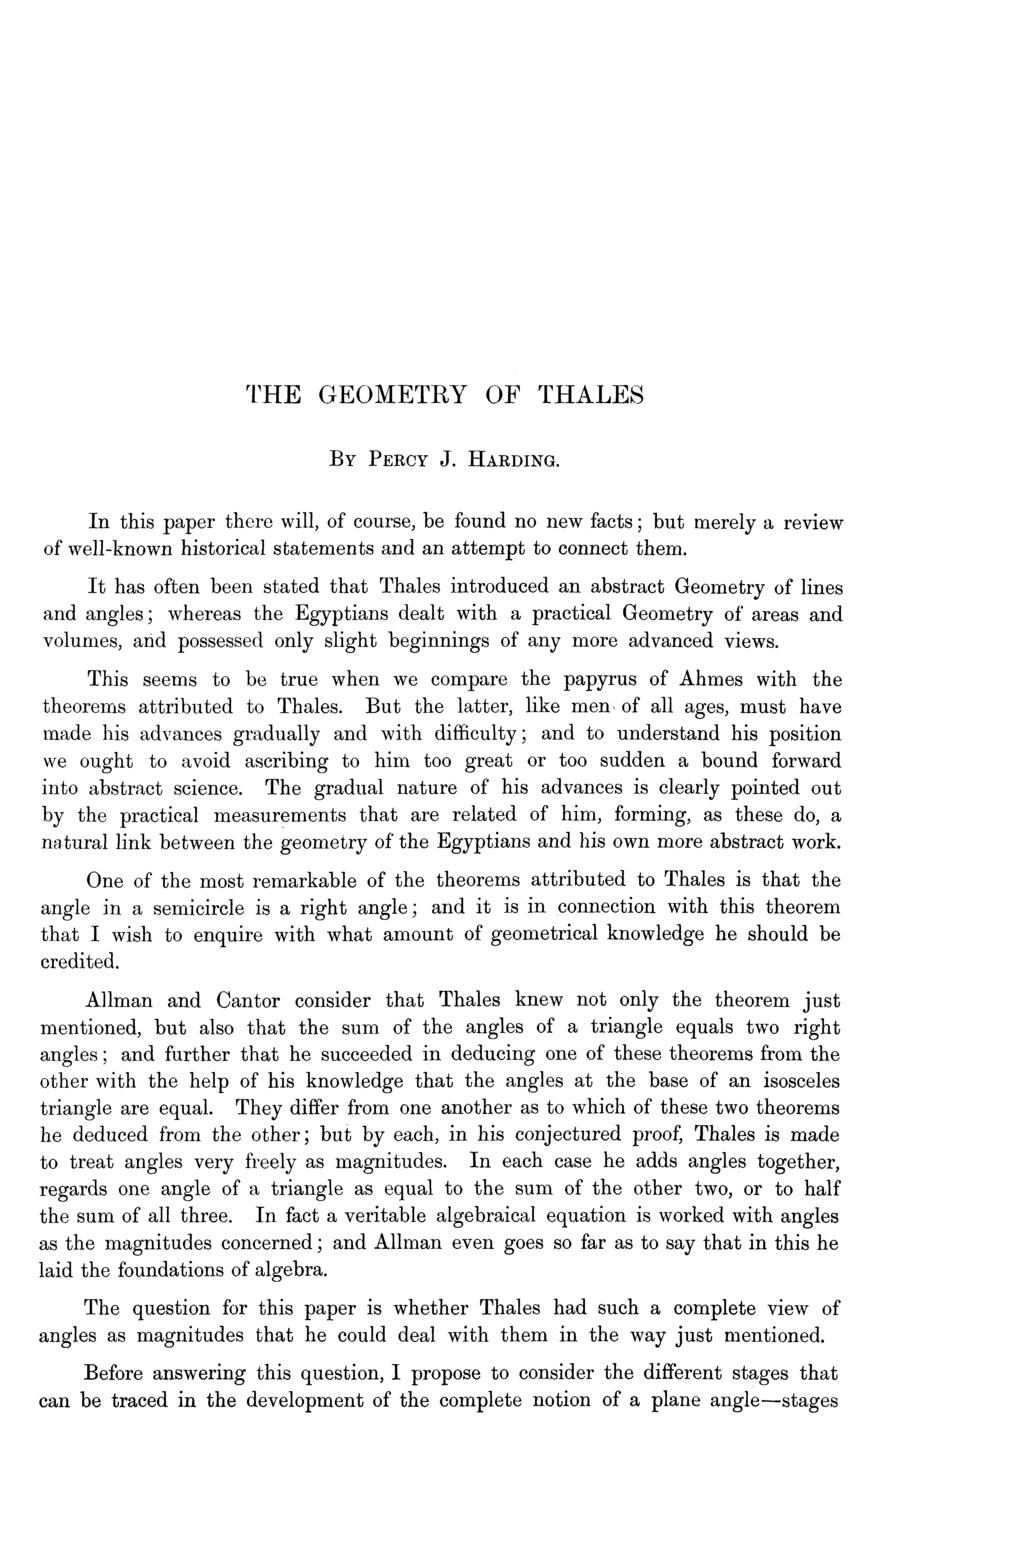 THE GEOMETRY OF THALES BY PERCY J. HARDING. In this paper there will, of course, be found no new facts ; but merely a review of well-known historical statements and an attempt to connect them.